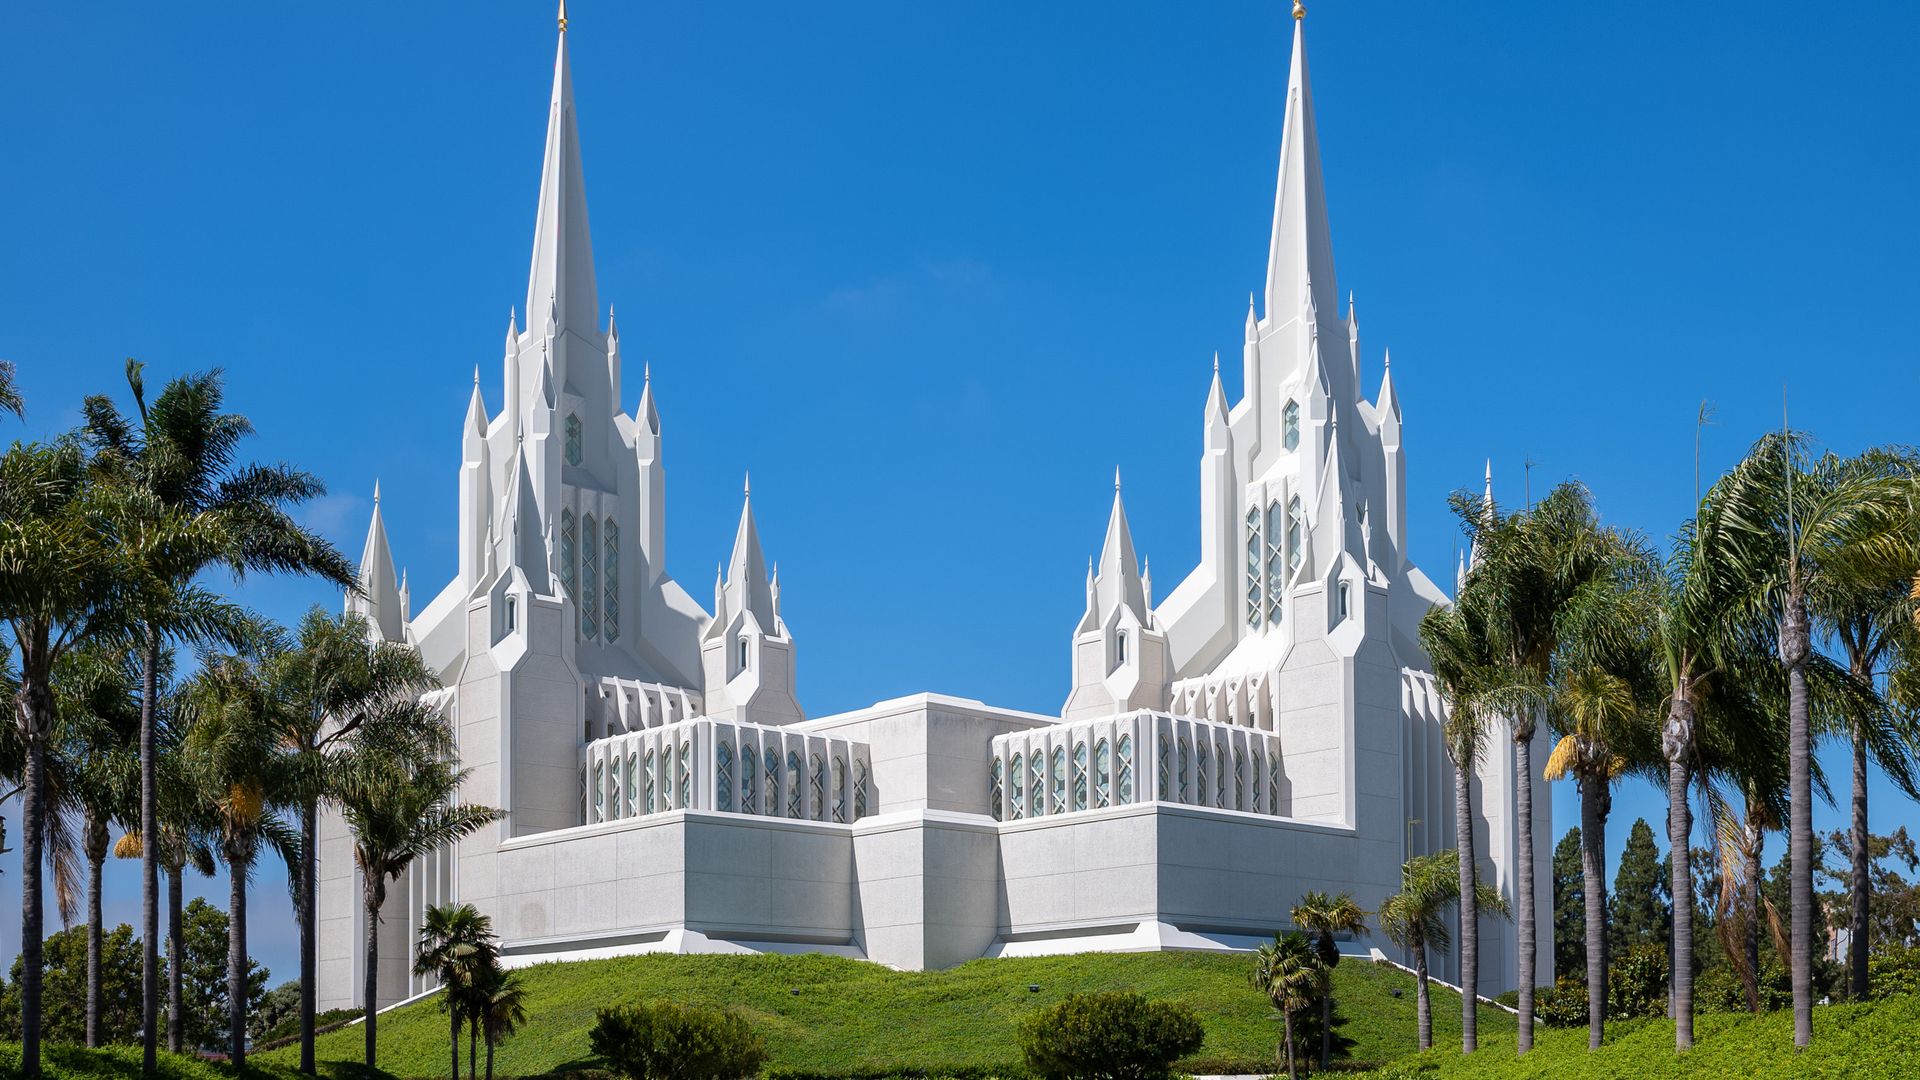 Photo of the San Diego California Temple against a blue sky and green grass